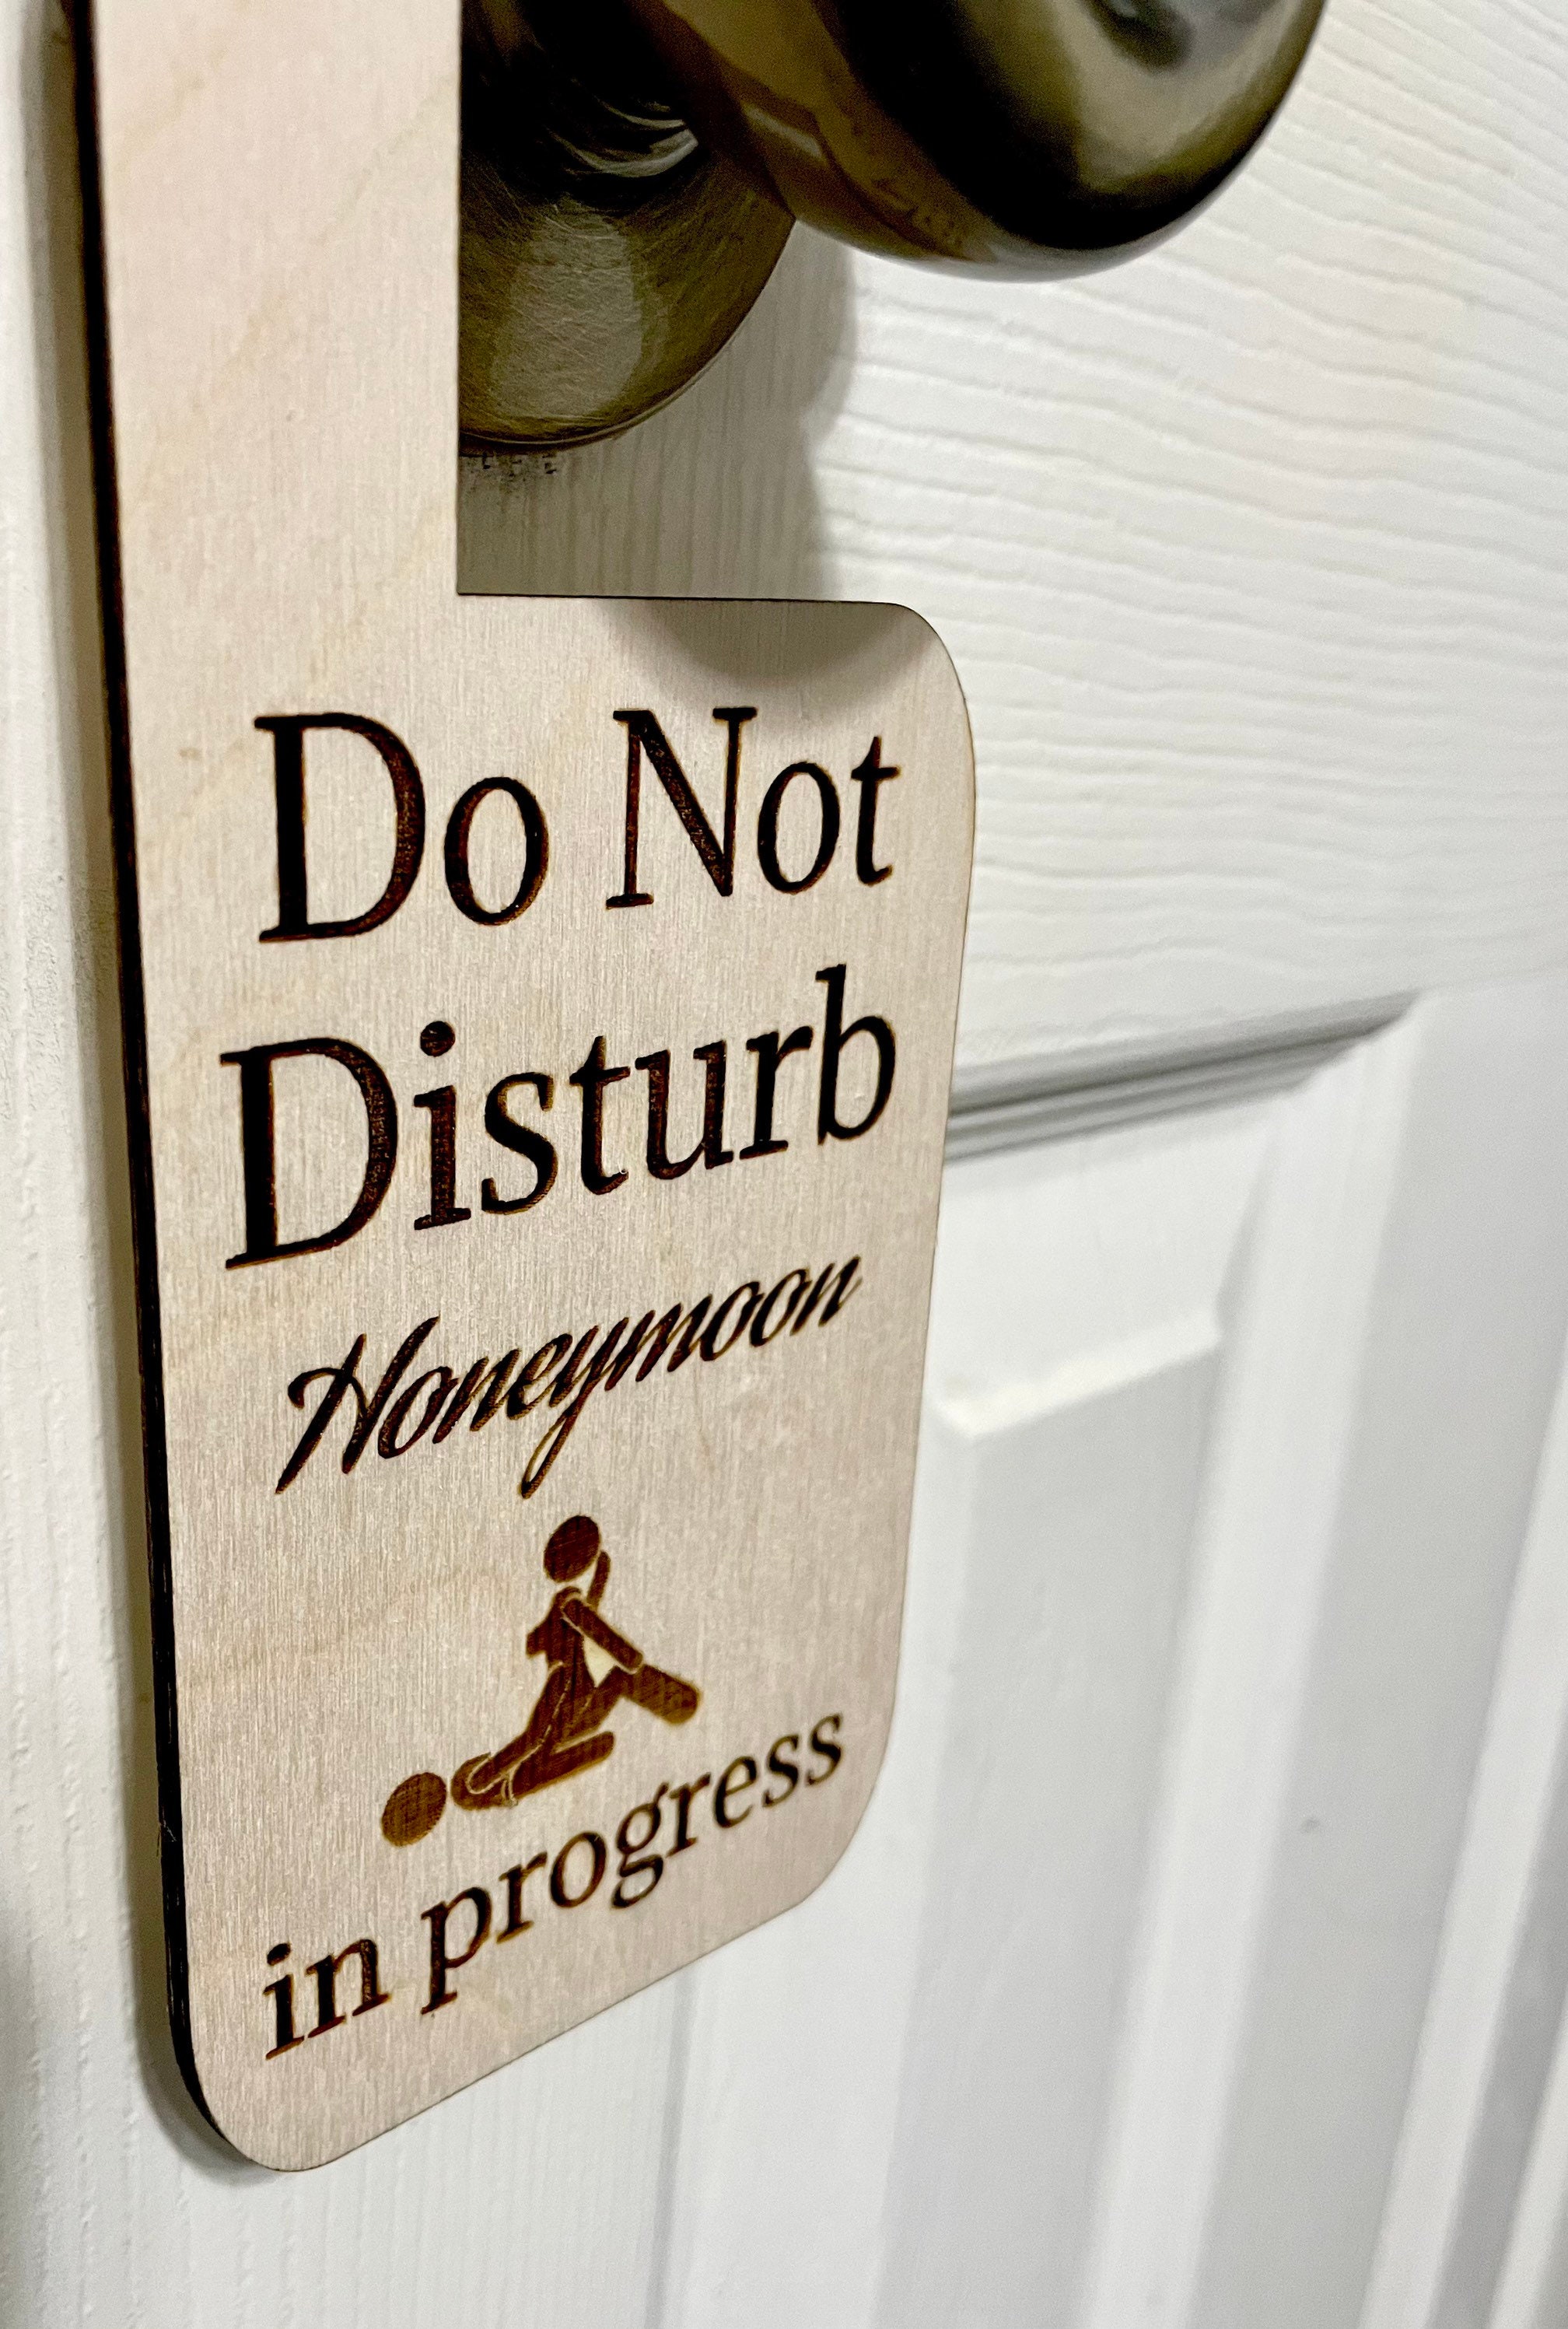 Do Not Disturb/Welcome To Join Doublesided Door Hanger Threesome Freaky  Kinky Sex